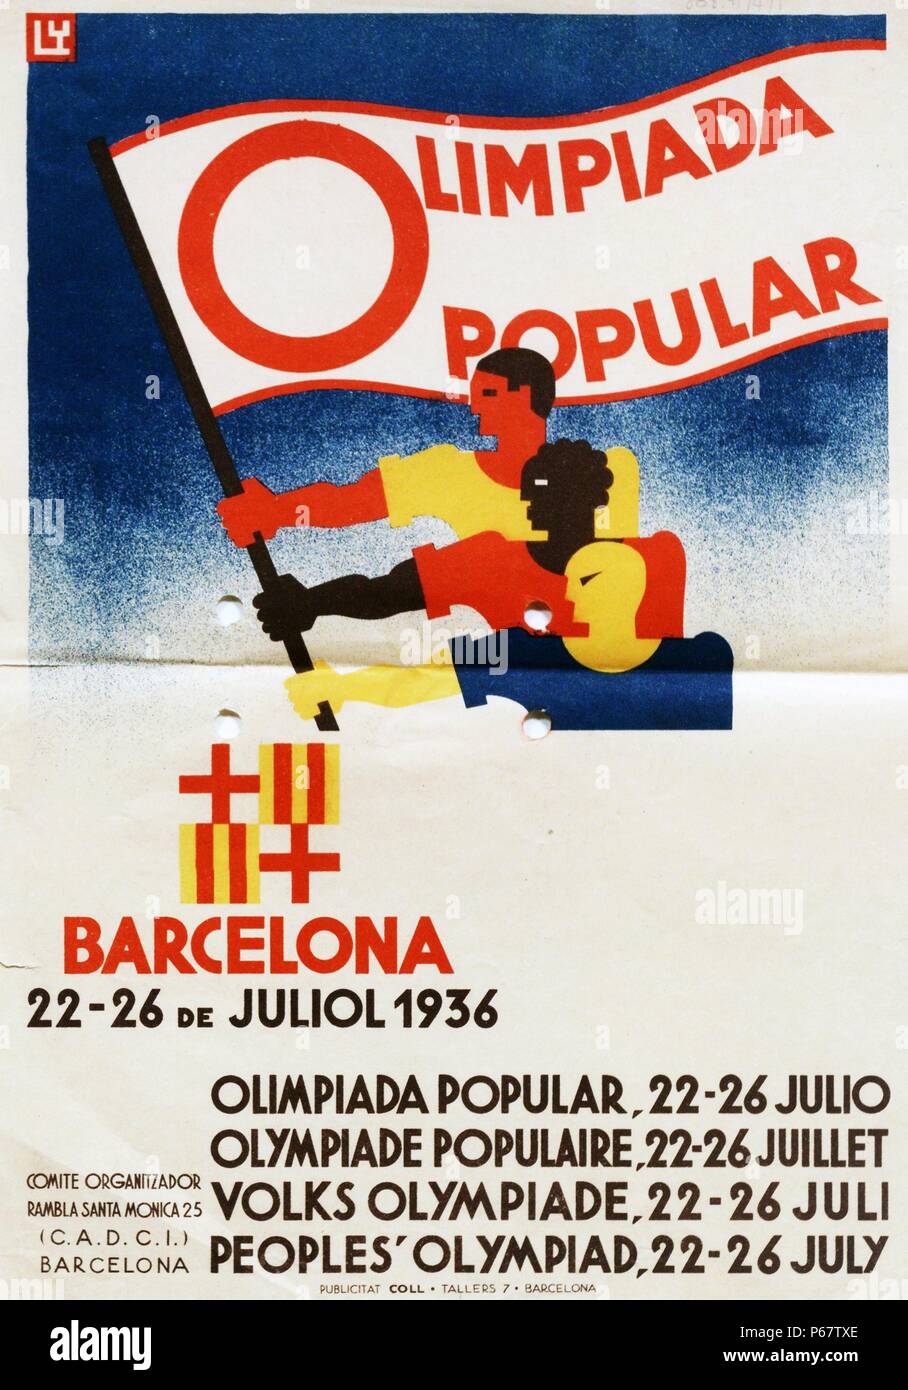 Poster for the Spanish bid for the 1936 Olympic Games. Berlin won the bid  to host the Games over Barcelona, Spain and it marked the second and final  time that the International